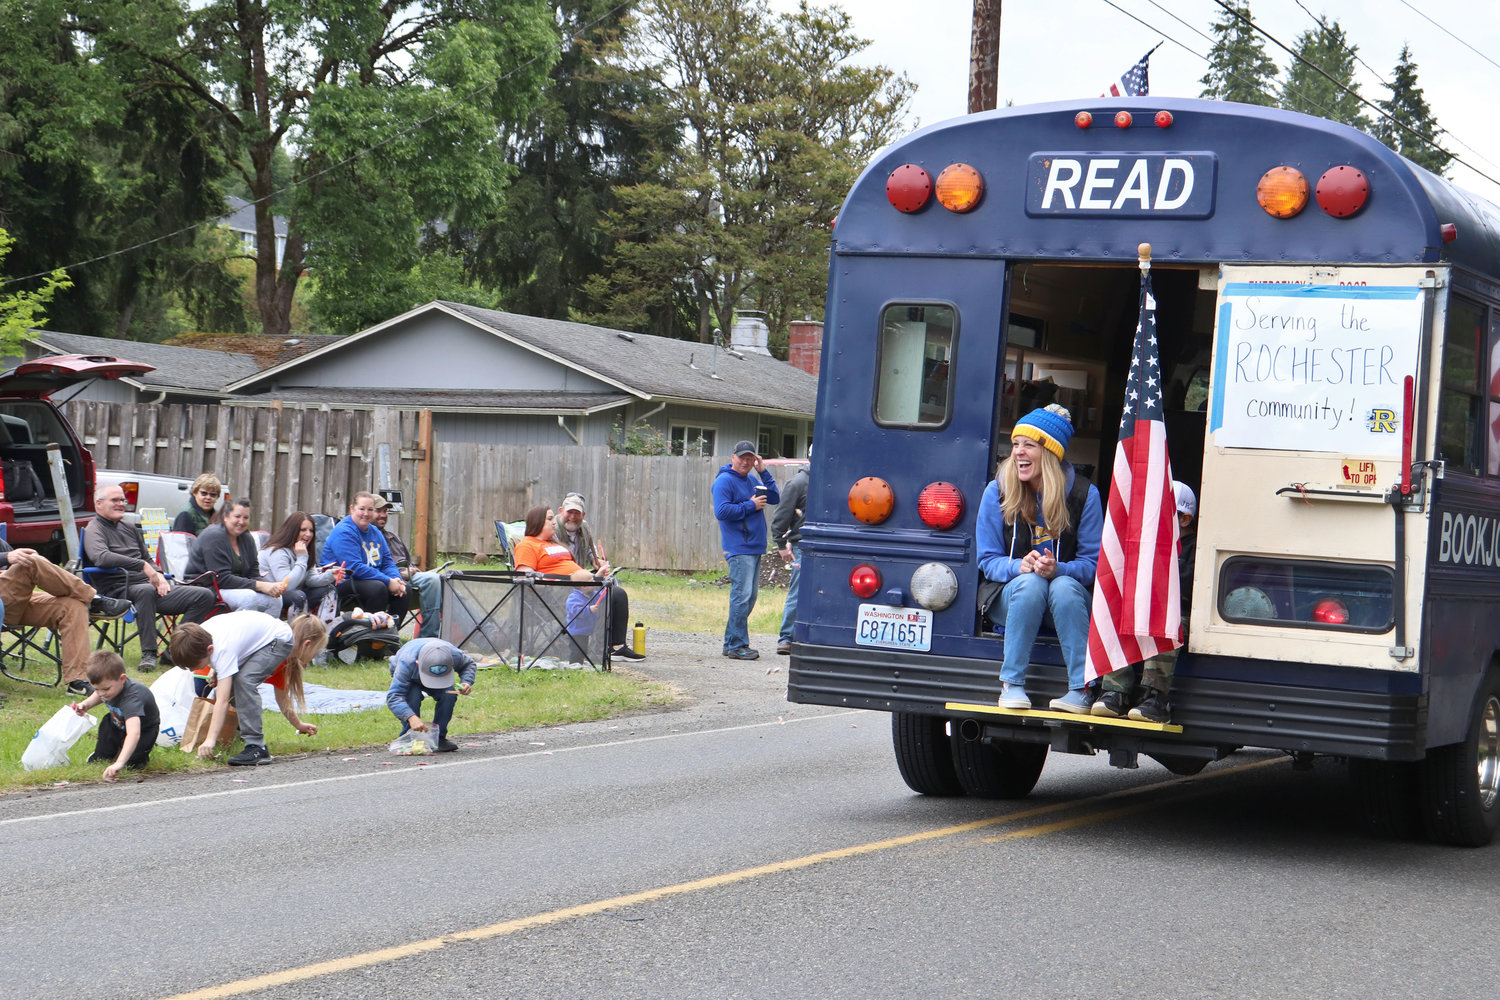 Children gather candy in the wake of the BookJoy Book Bus, a mobile library that serves the Rochester community, during the Swede Day Parade in Rochester on Saturday.